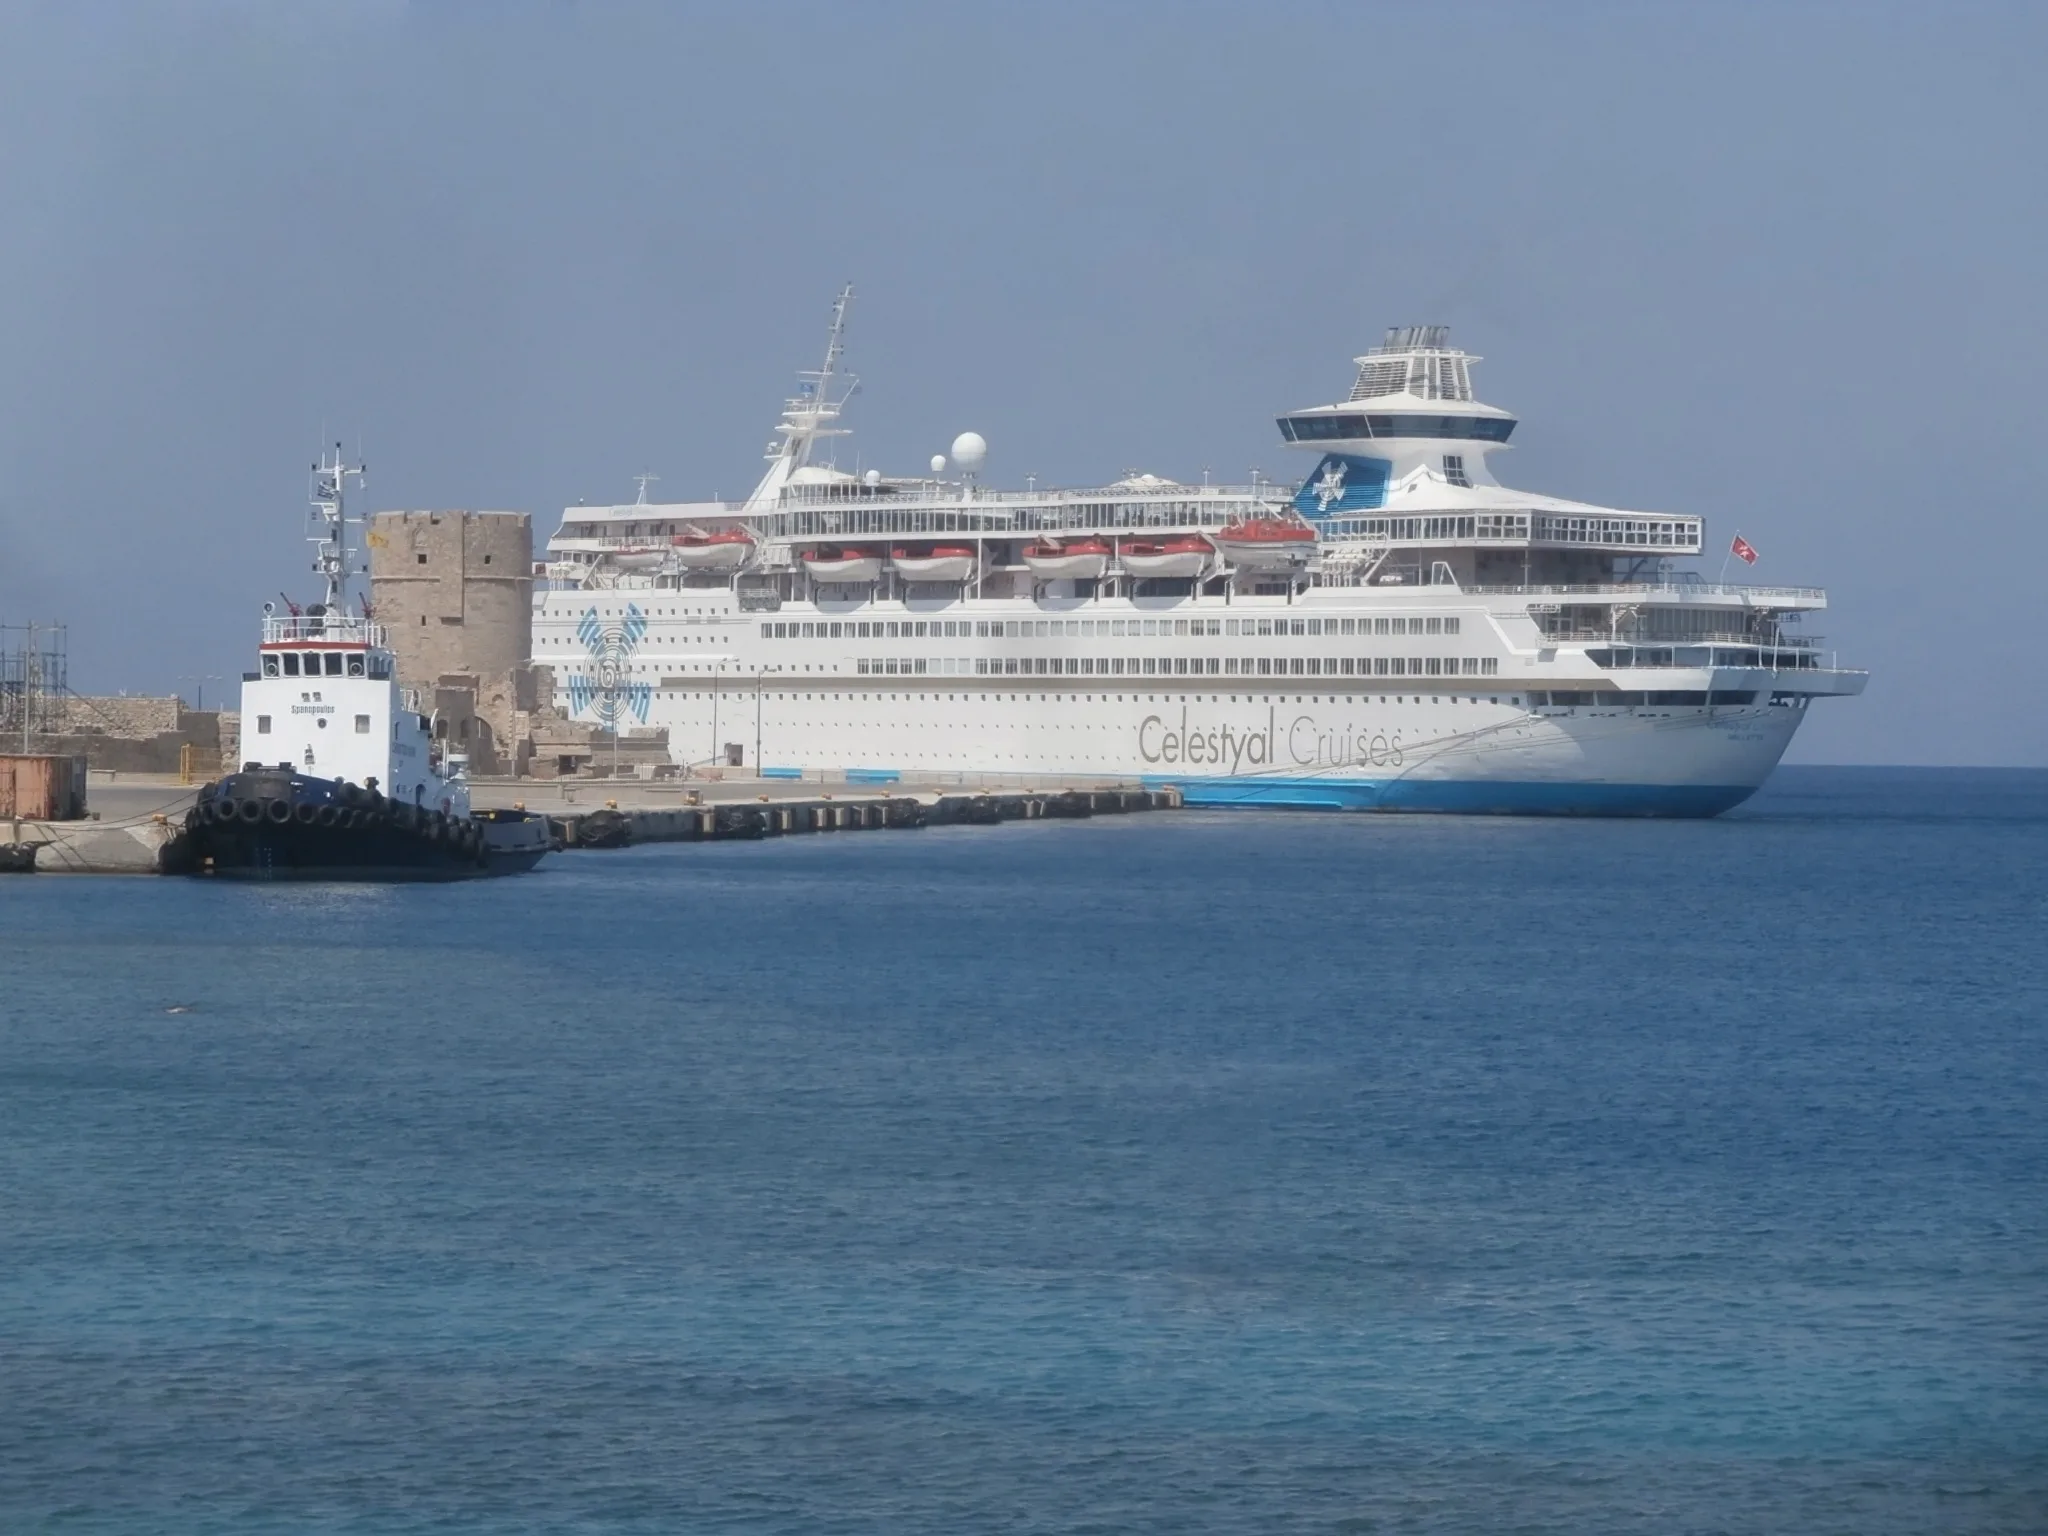 Wikimedia Commons (https://touristwire.com/wp-content/uploads/2023/05/Christos_XXVII_and_Celestyal_Olympia_moored_at_Quay_in_Port_of_Rhodes_4_September_2019.jpg)